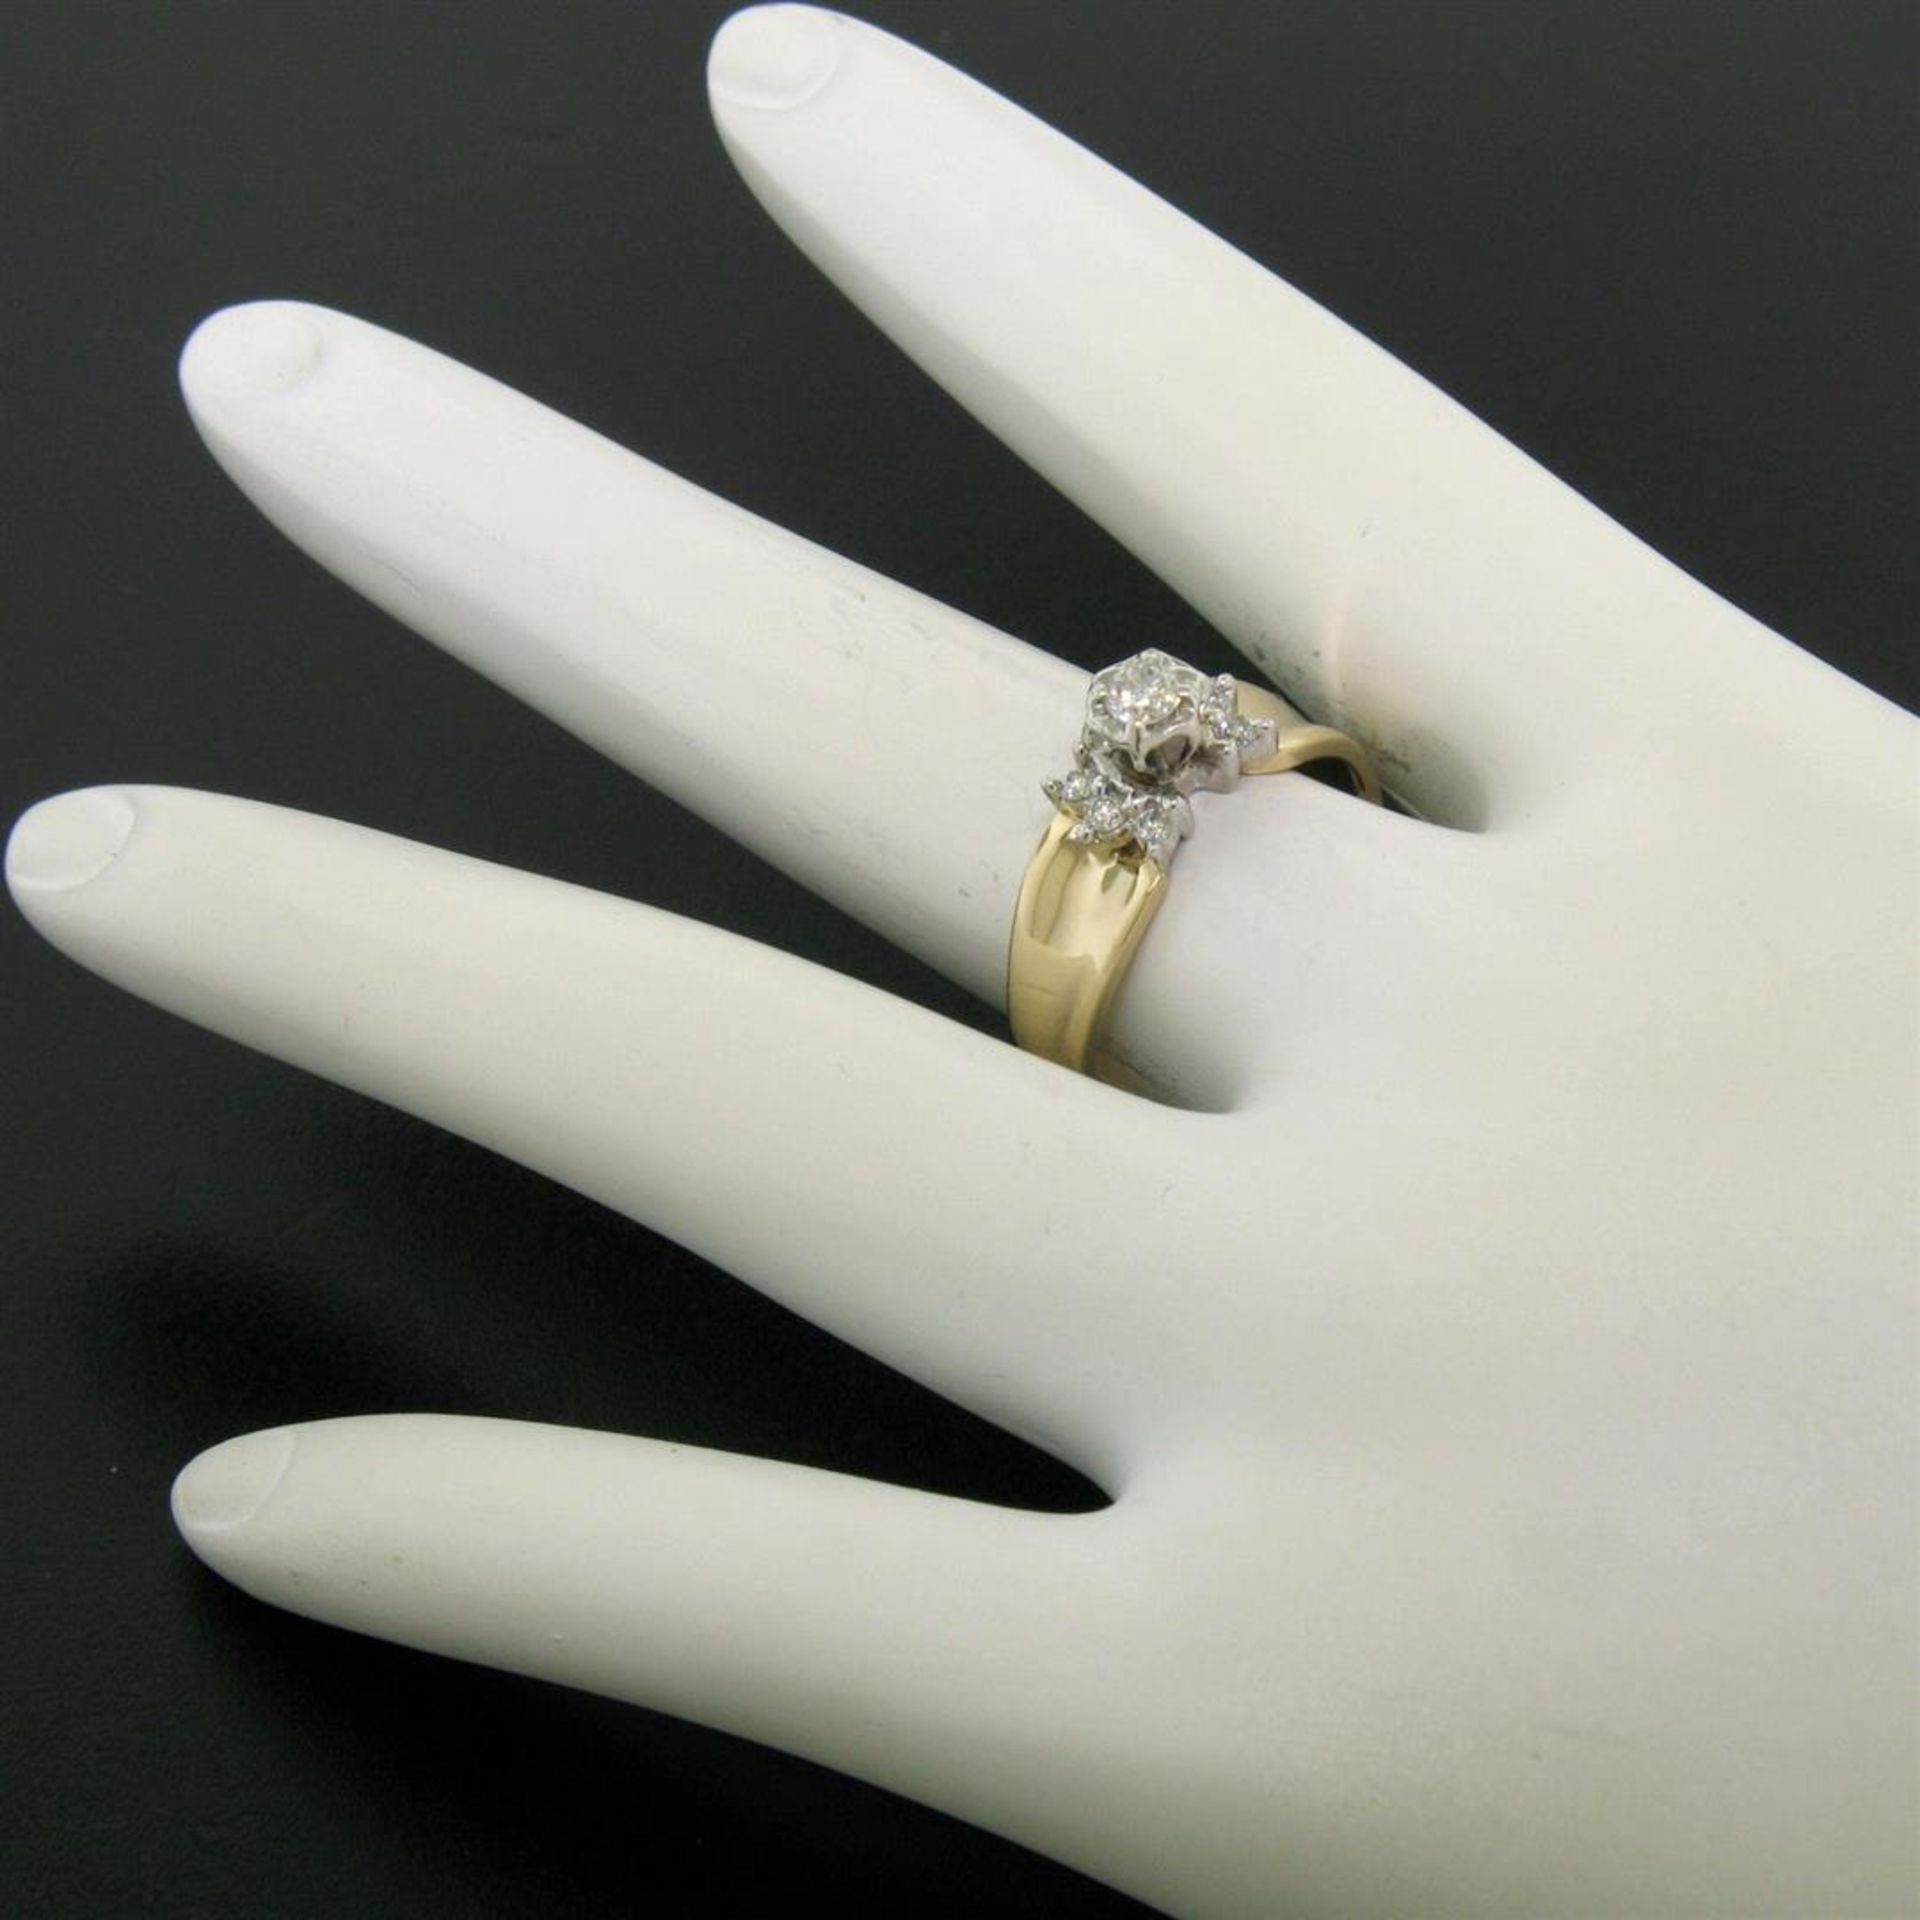 14k Two Tone Gold 0.30 ctw Illusion Set Solitaire Diamond Engagement Ring - Image 4 of 8